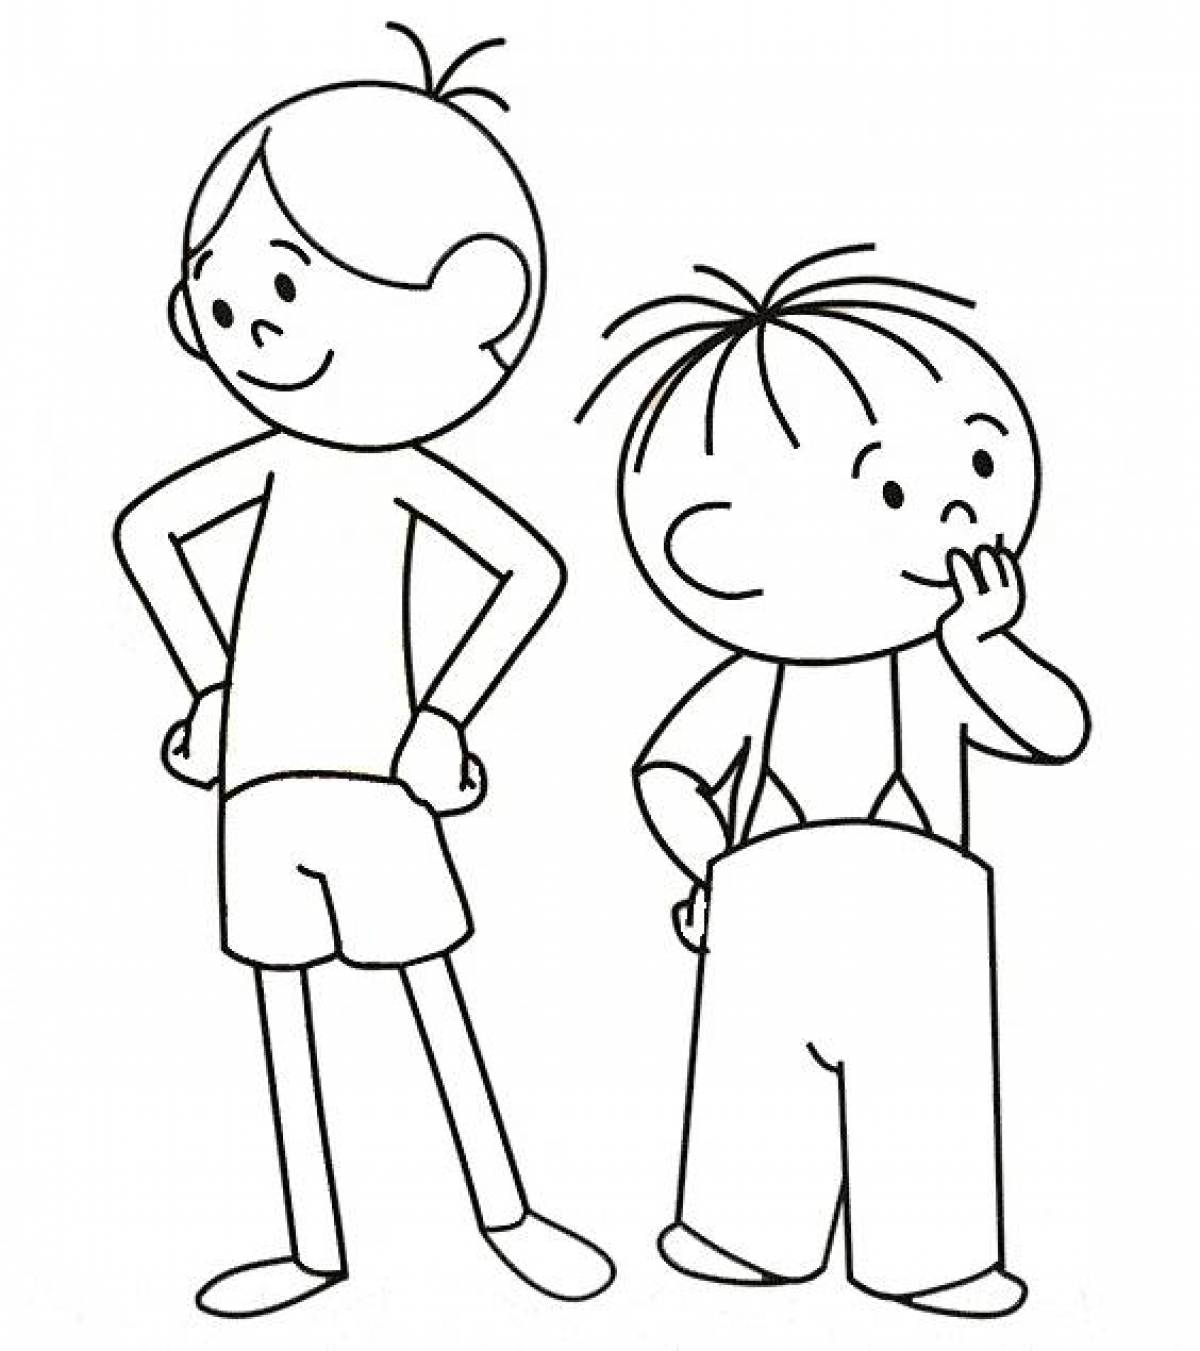 Coloring-connections friends coloring page